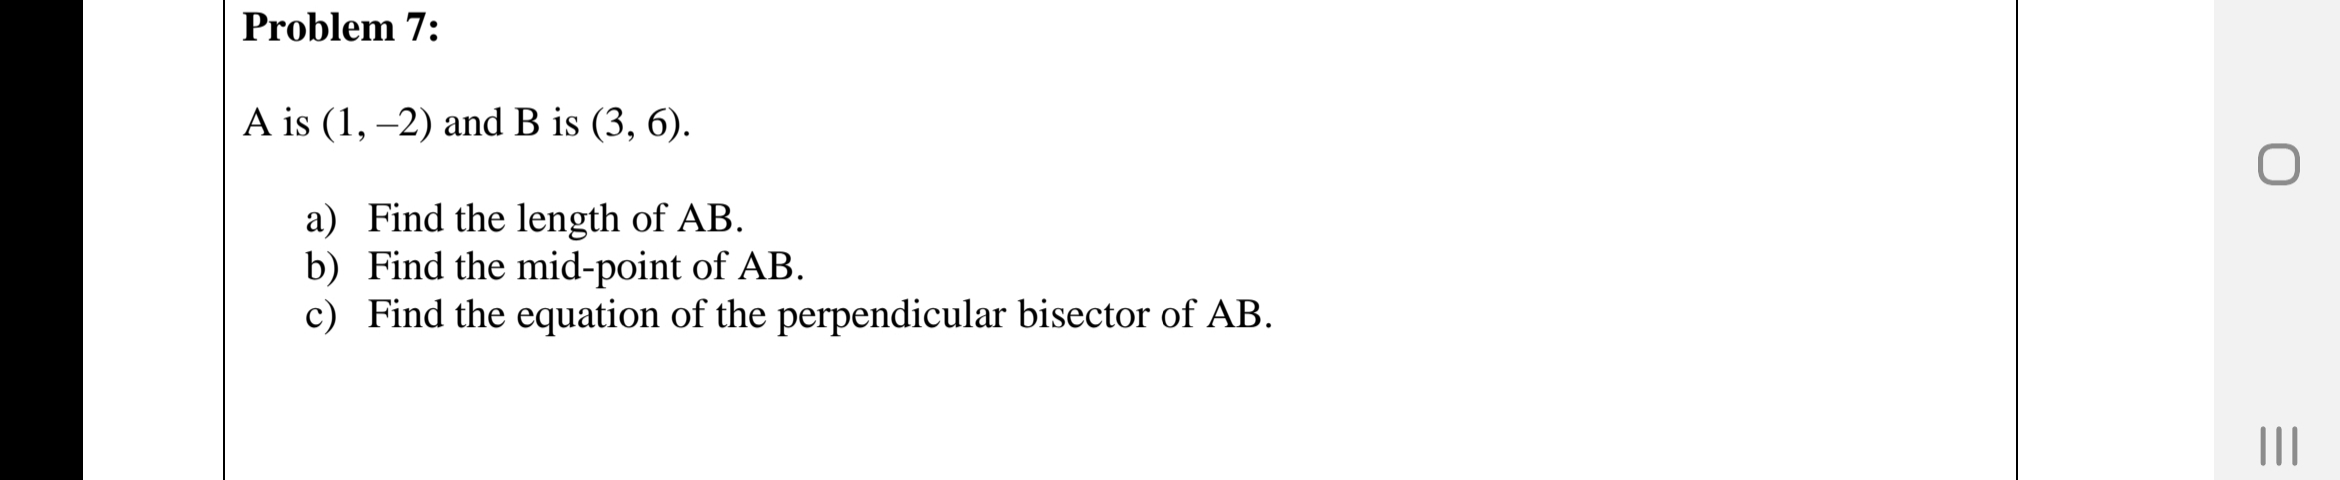 A is (1, –2) and B is (3, 6).
a) Find the length of AB.
b) Find the mid-point of AB.
c) Find the equation of the perpendicular bisector of AB.
